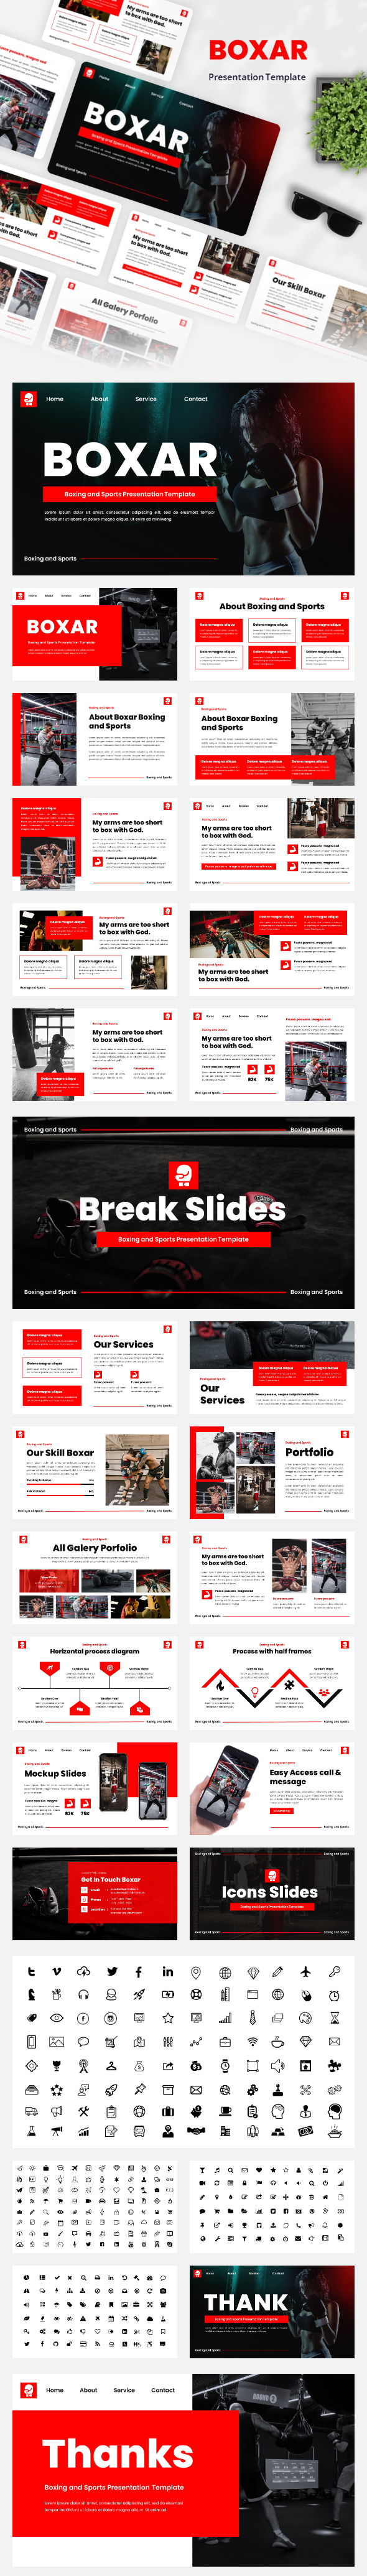 Boxar - Boxing and Sports Keynote Template